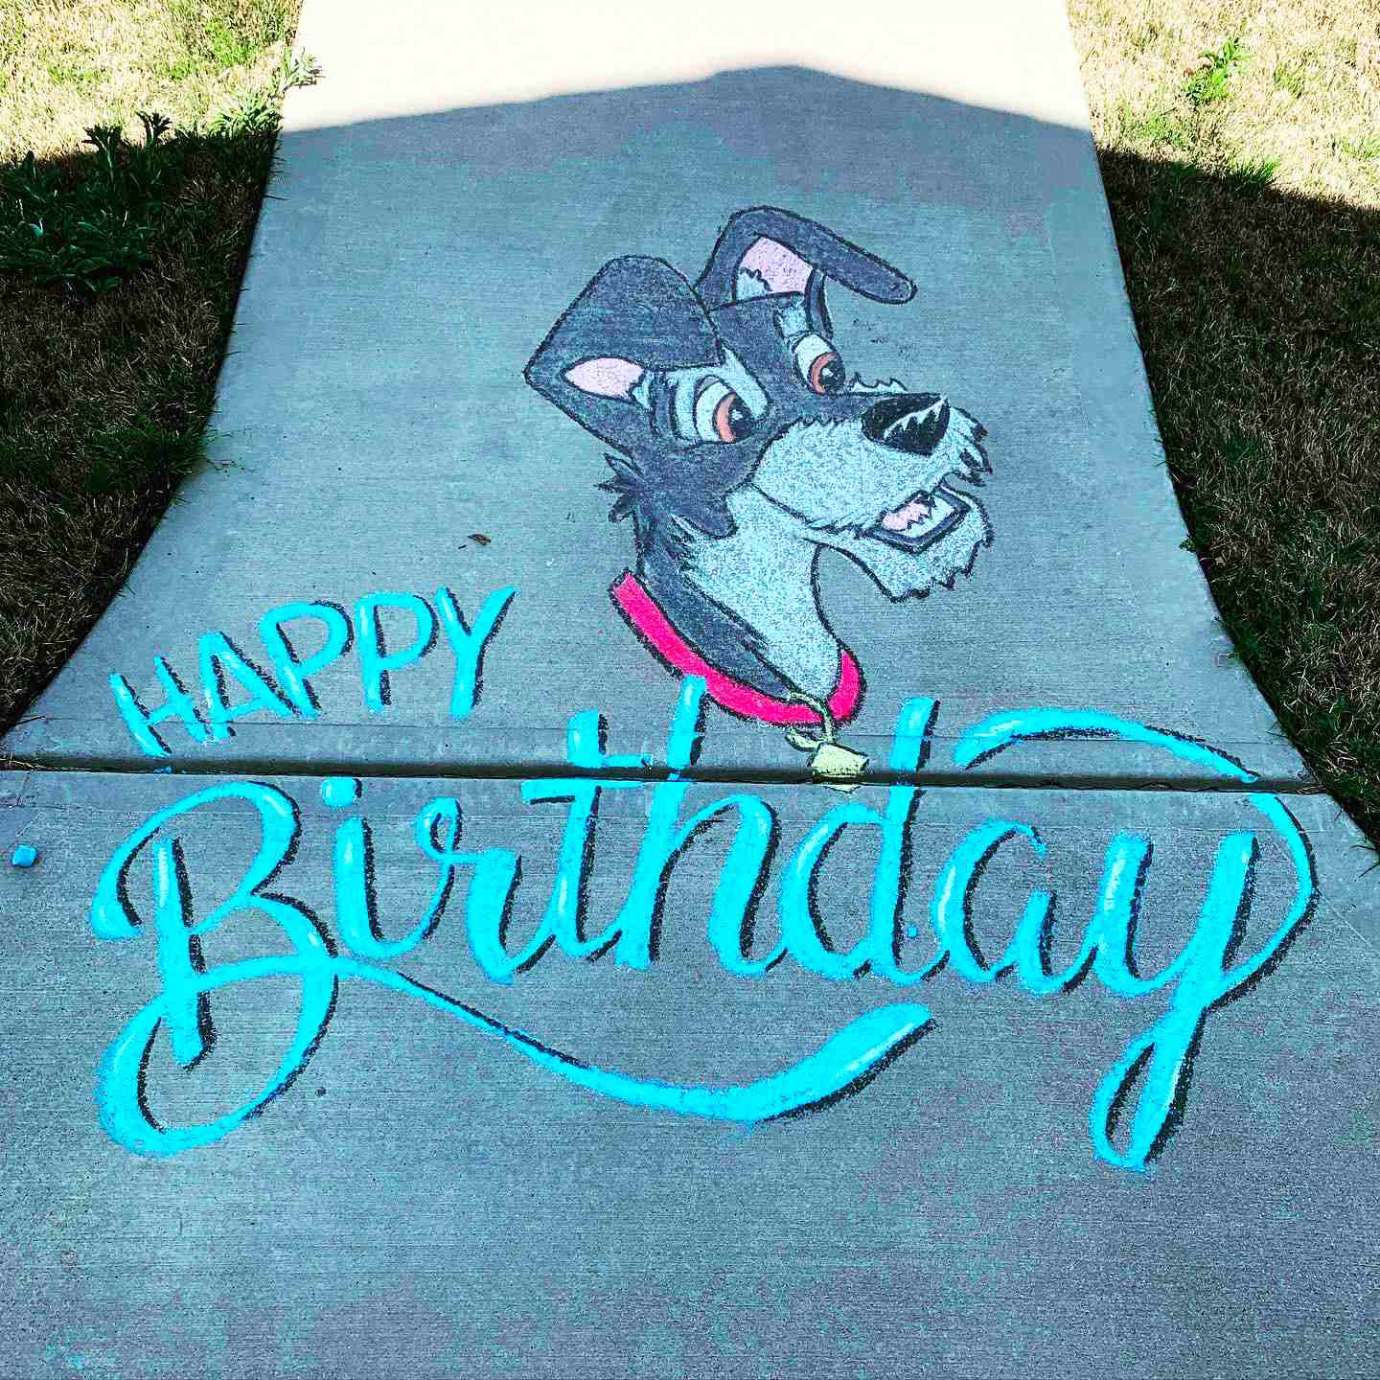 A sidewalk chalk drawing of the Disney dog character, Tramp, and the words "Happy Birthday"